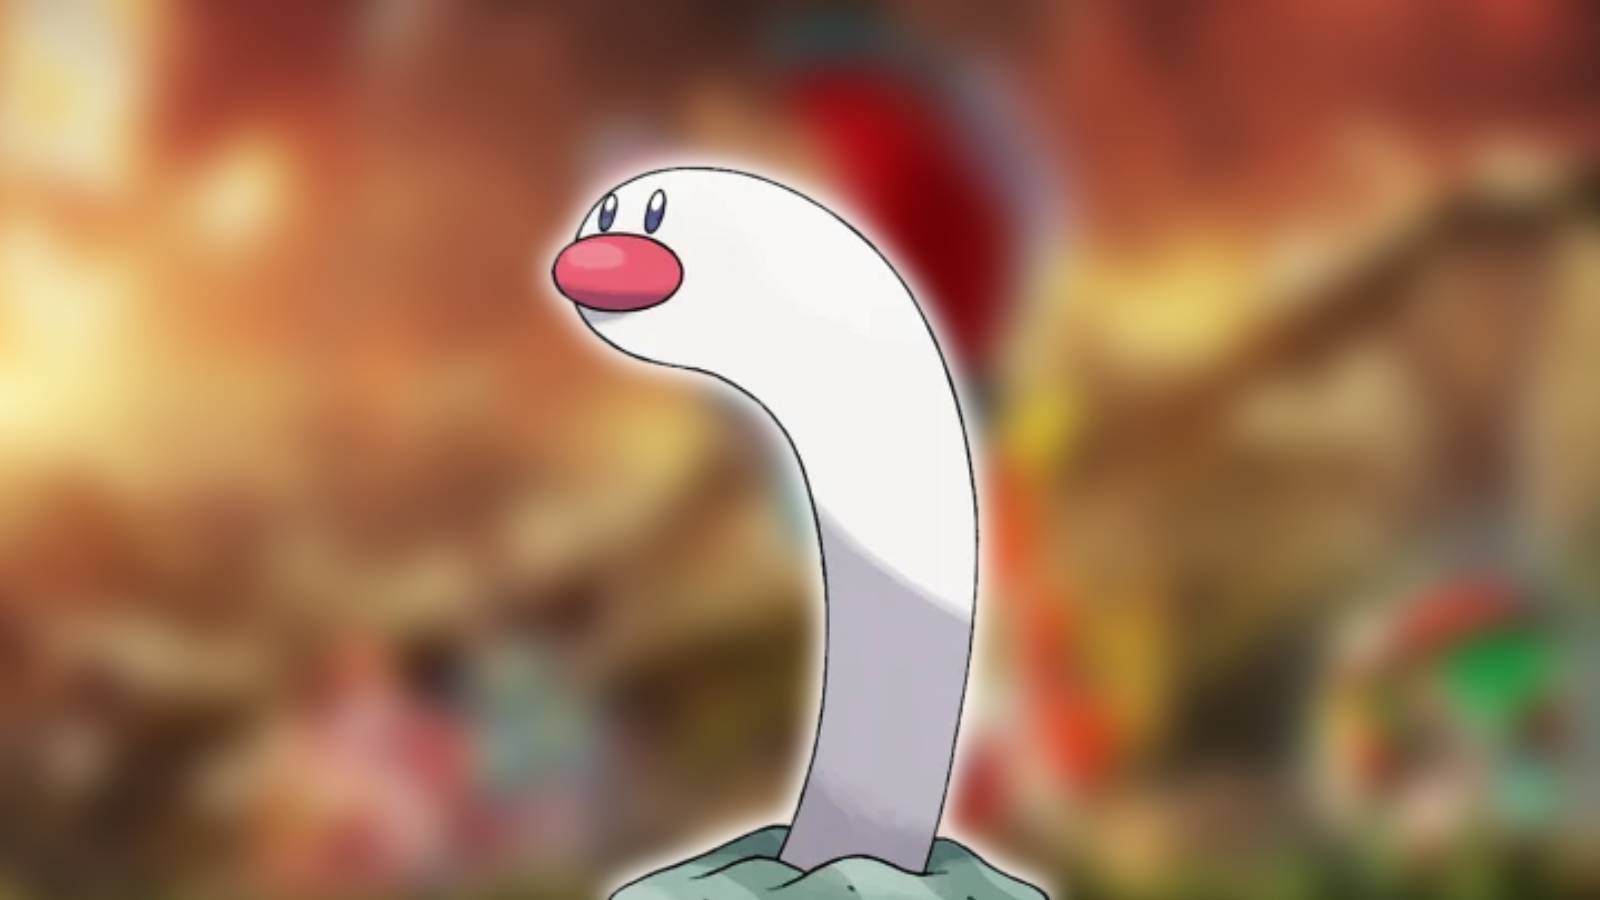 Key art shows the eel Pokemon Wiglett, placed against a blurred image of official Pokemon TCG Paradox Rift art